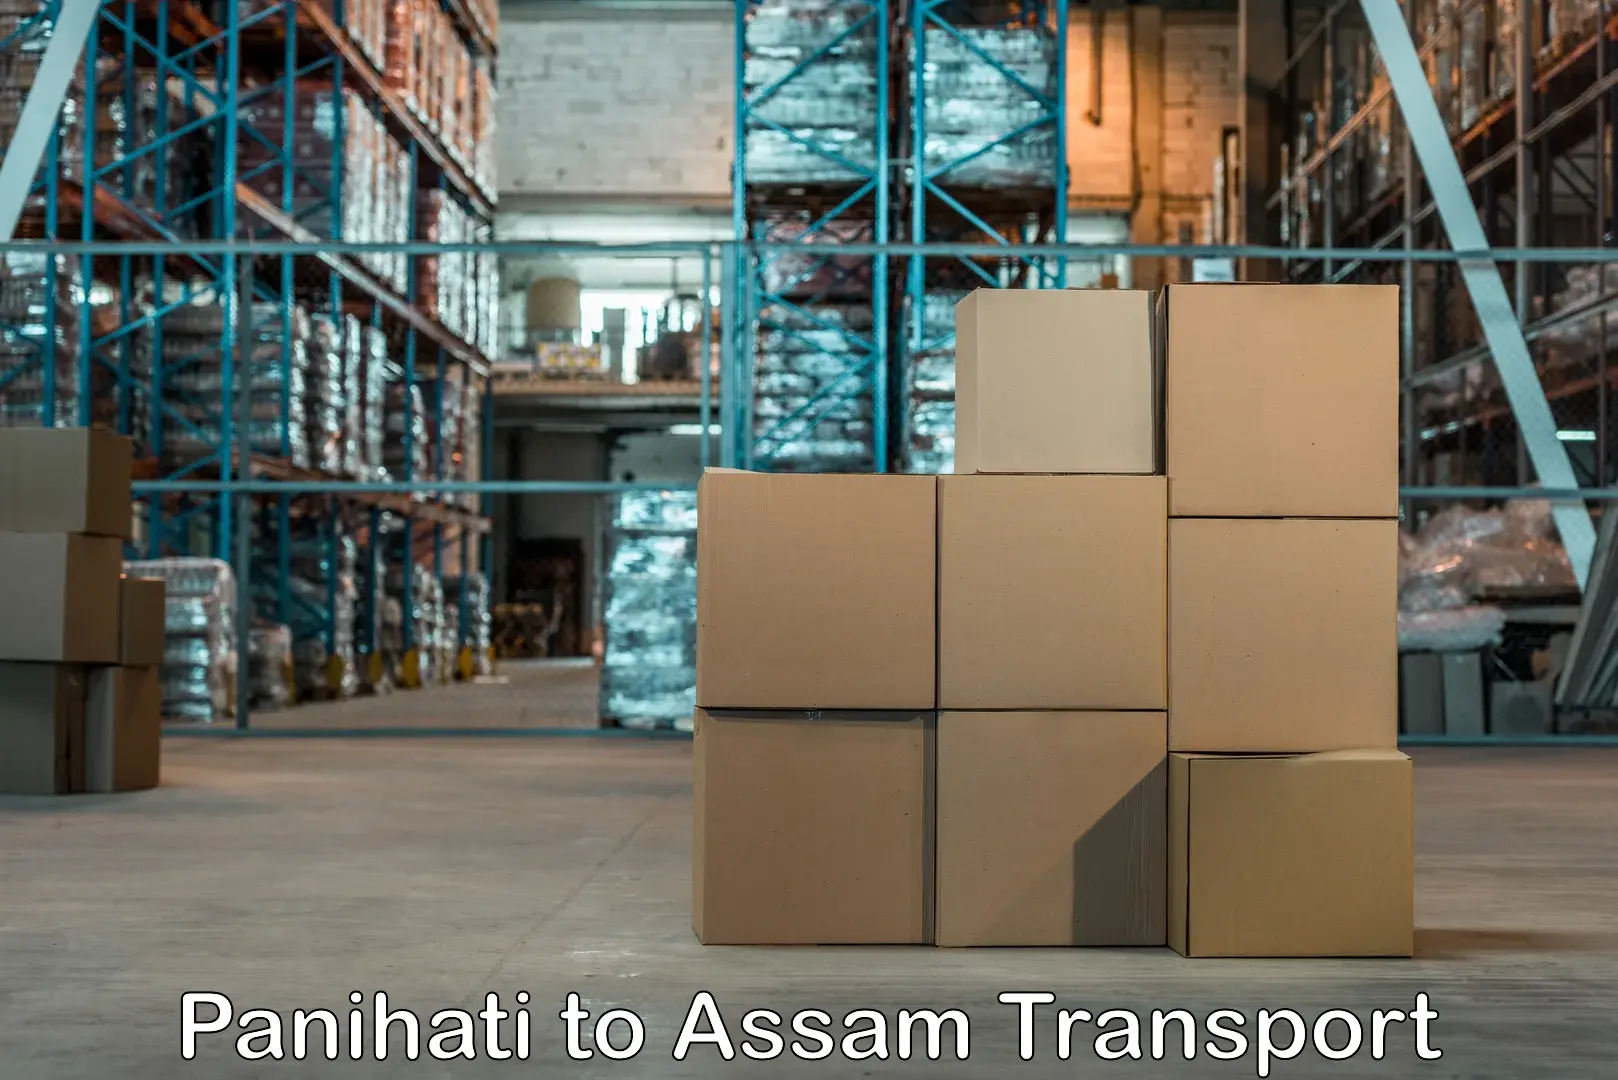 Land transport services in Panihati to Kamrup